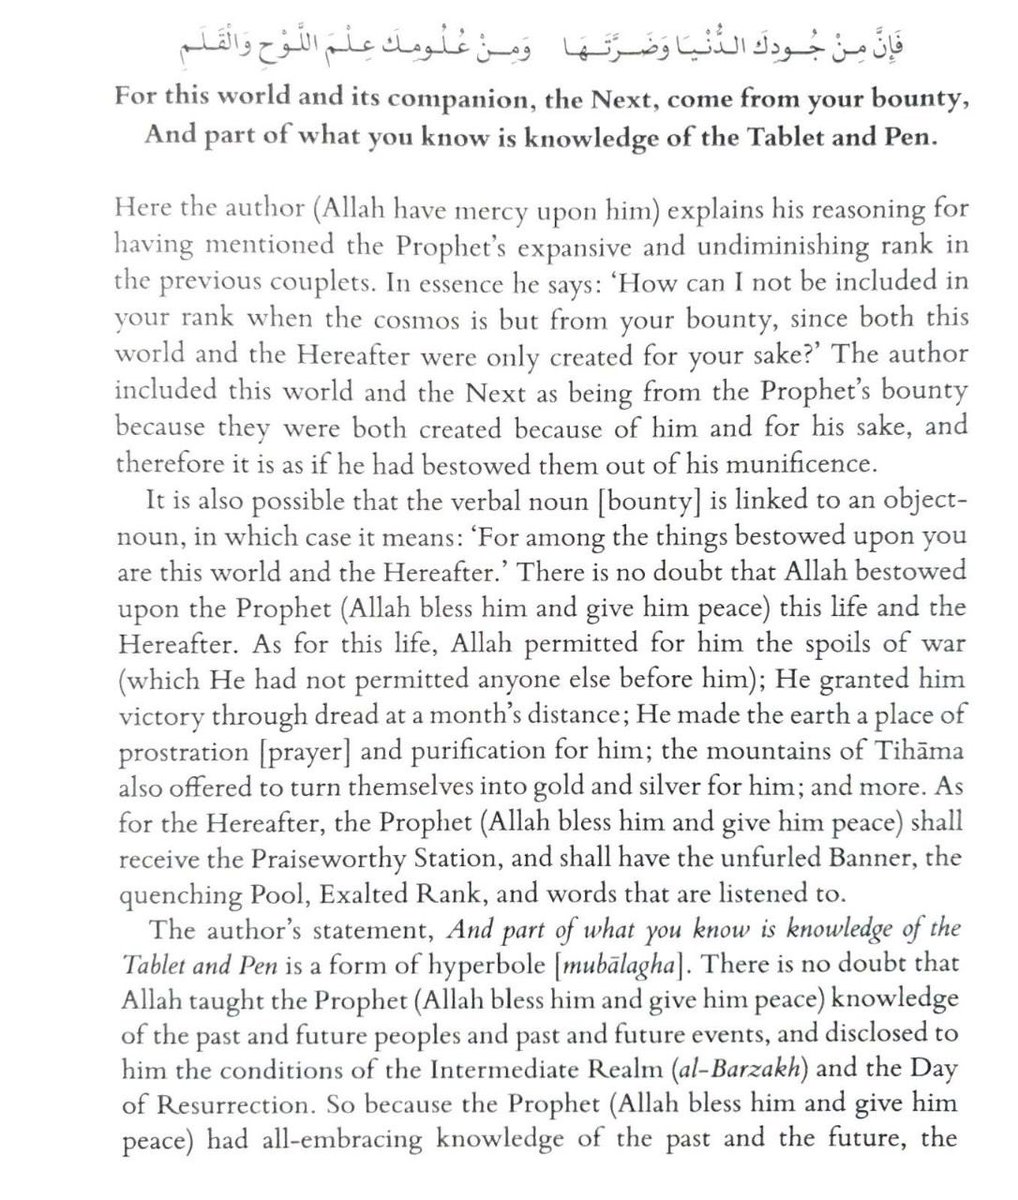 In the book it says, 'There is no doubt that Allah taught the Prophet knowledge of the past and future'.'The Prophet had all embracing knowledge of the past and future'.